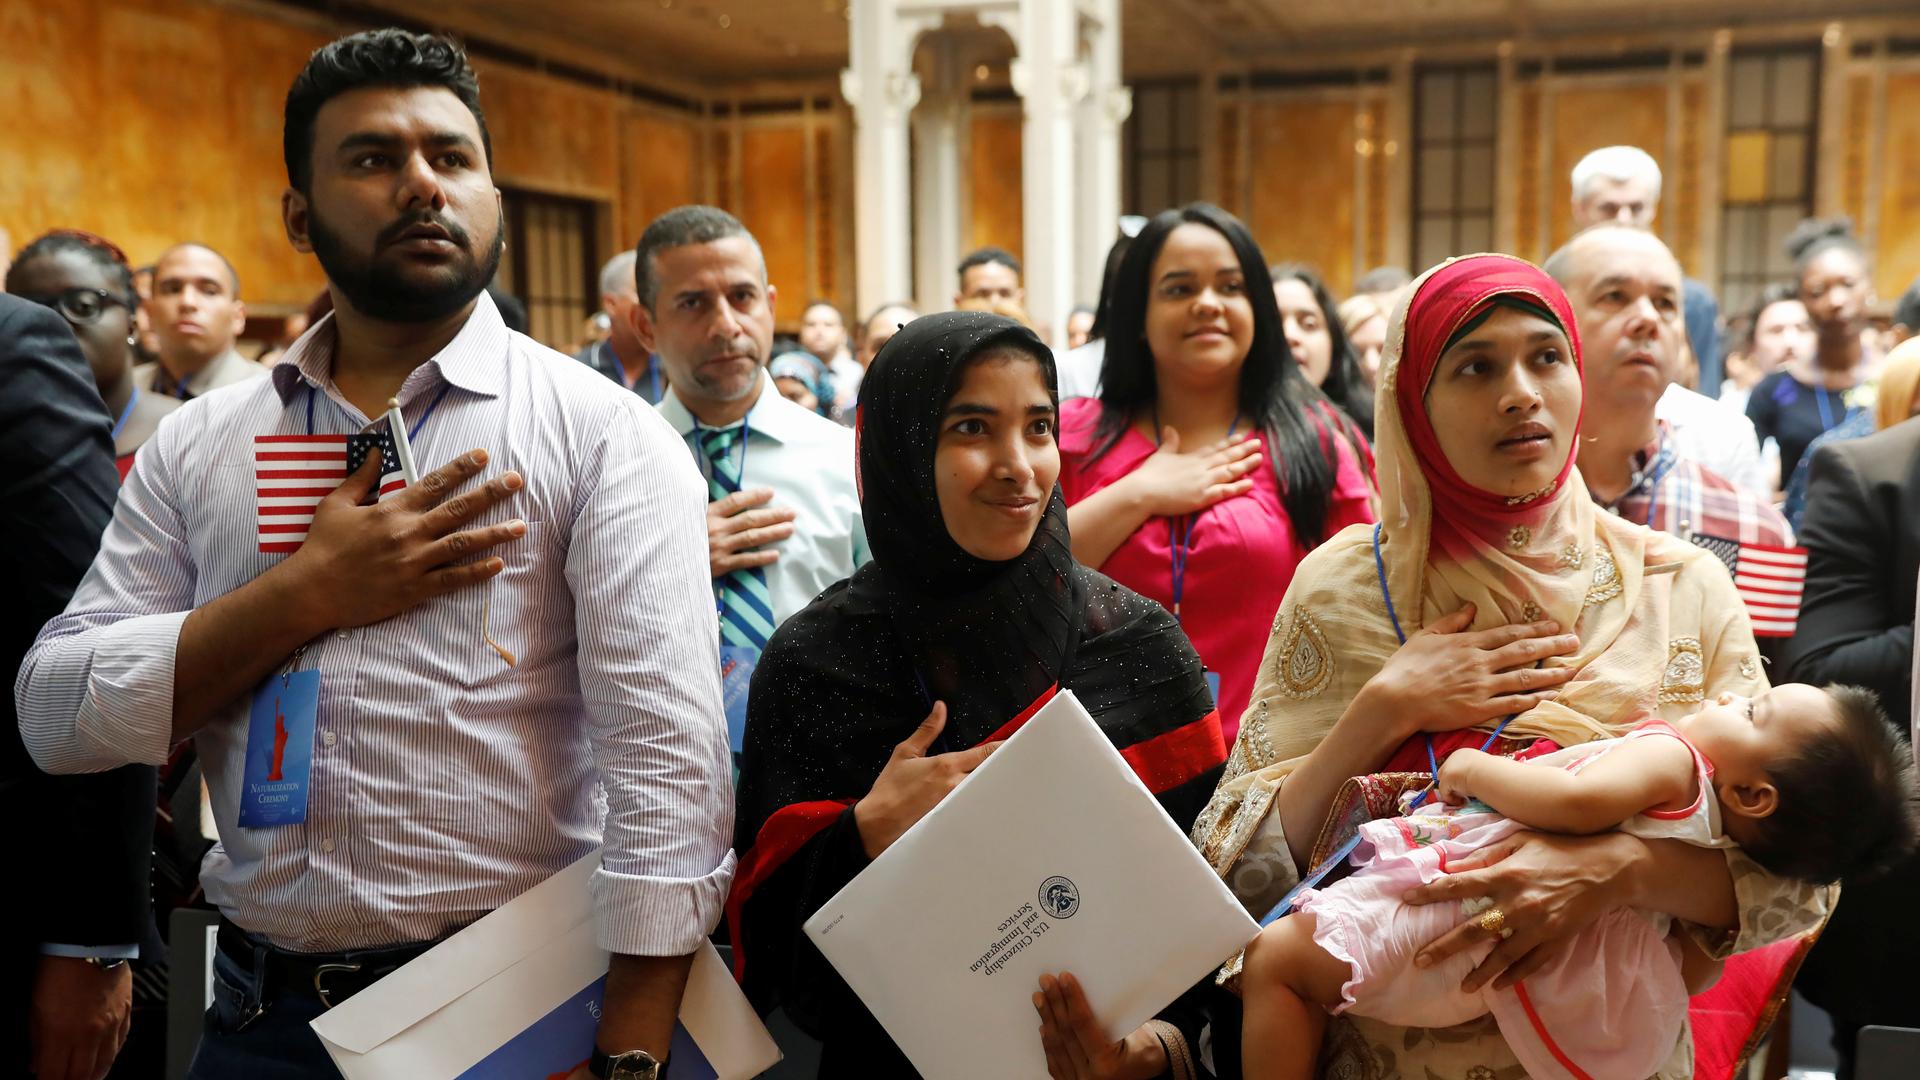 New citizens stand during the National Anthem at a US Citizenship and Immigration Services (USCIS) naturalization ceremony at the New York Public Library in Manhattan, New York, on July 3, 2018.